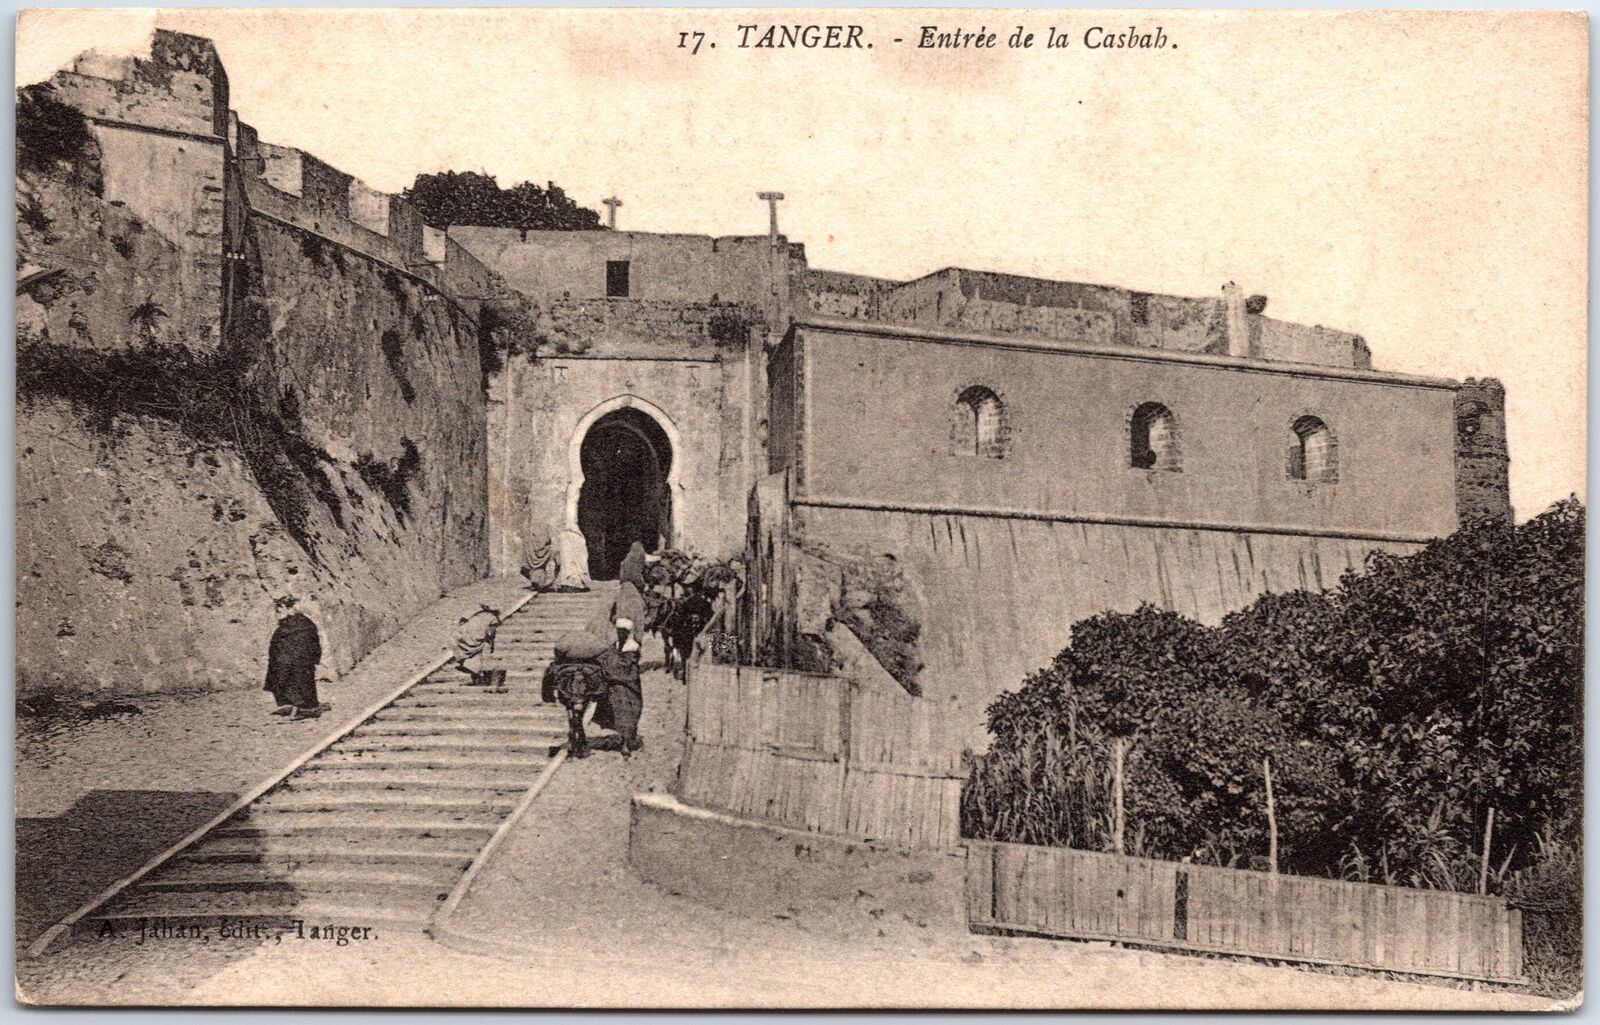 VINTAGE POSTCARD ENTRANCE TO THE CASBAH AT TANGIER MOROCCO c. 1910s